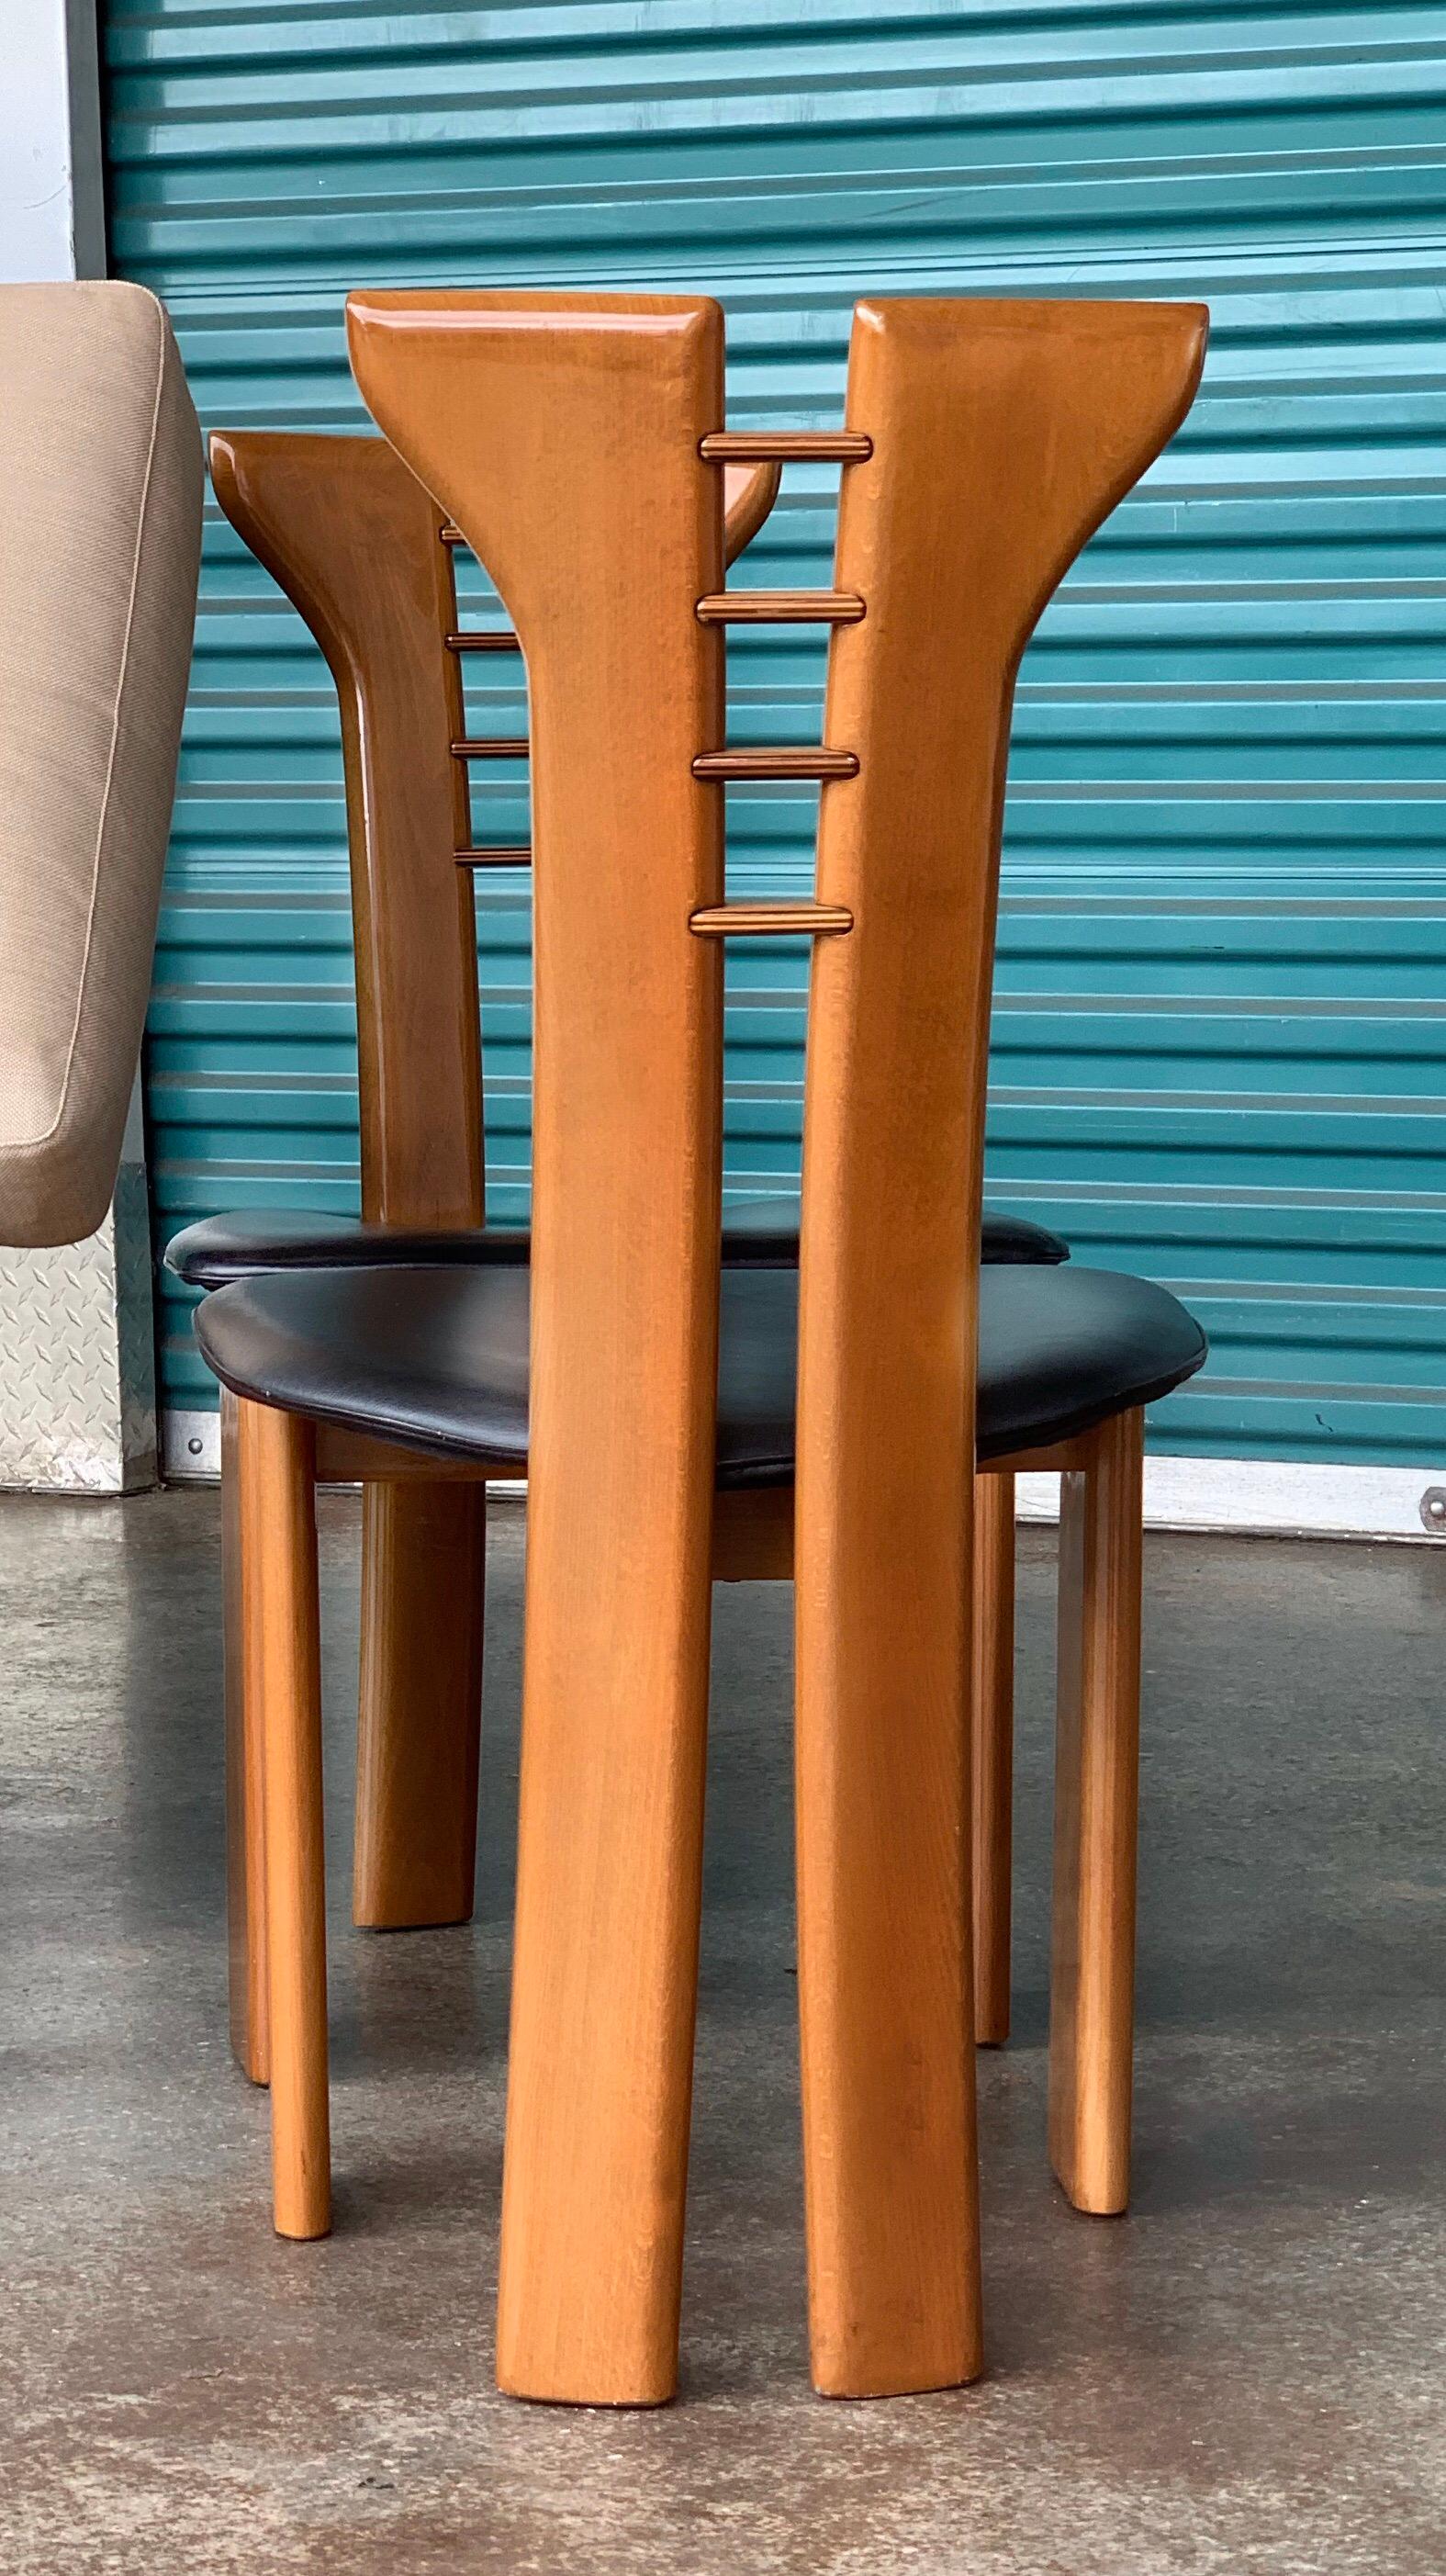 Set of six dining chairs by Pierre Cardin in very good original condition. Clear lacquer / Natural wood finish with black leather seats. Very rare color way. Most examples of this design by Cardin were sold with black lacquered wood and tan or black